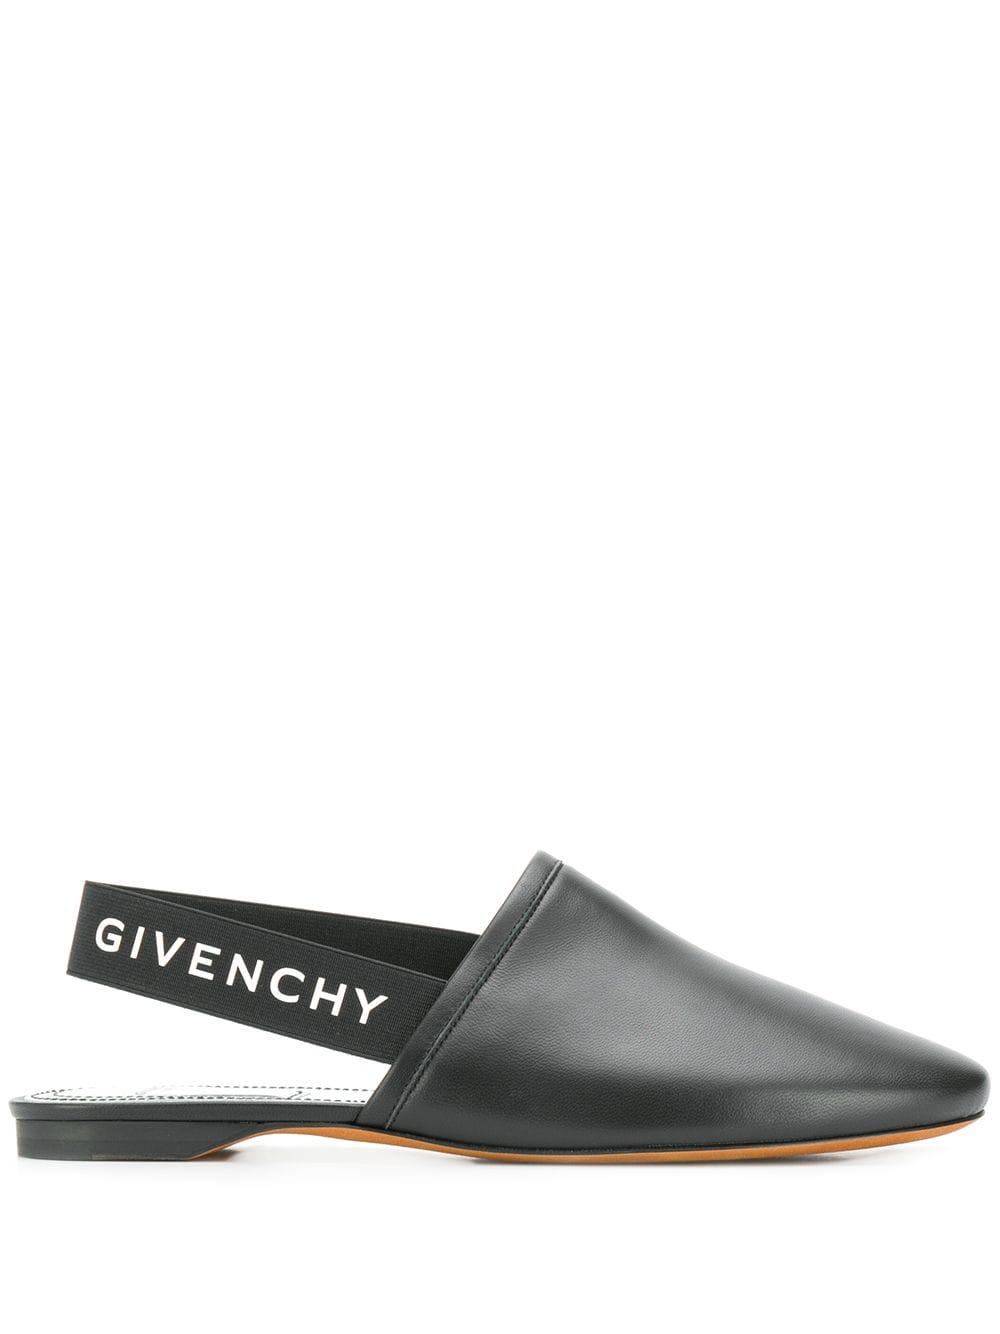 Givenchy Slingback Flat Mules in Black | Lyst